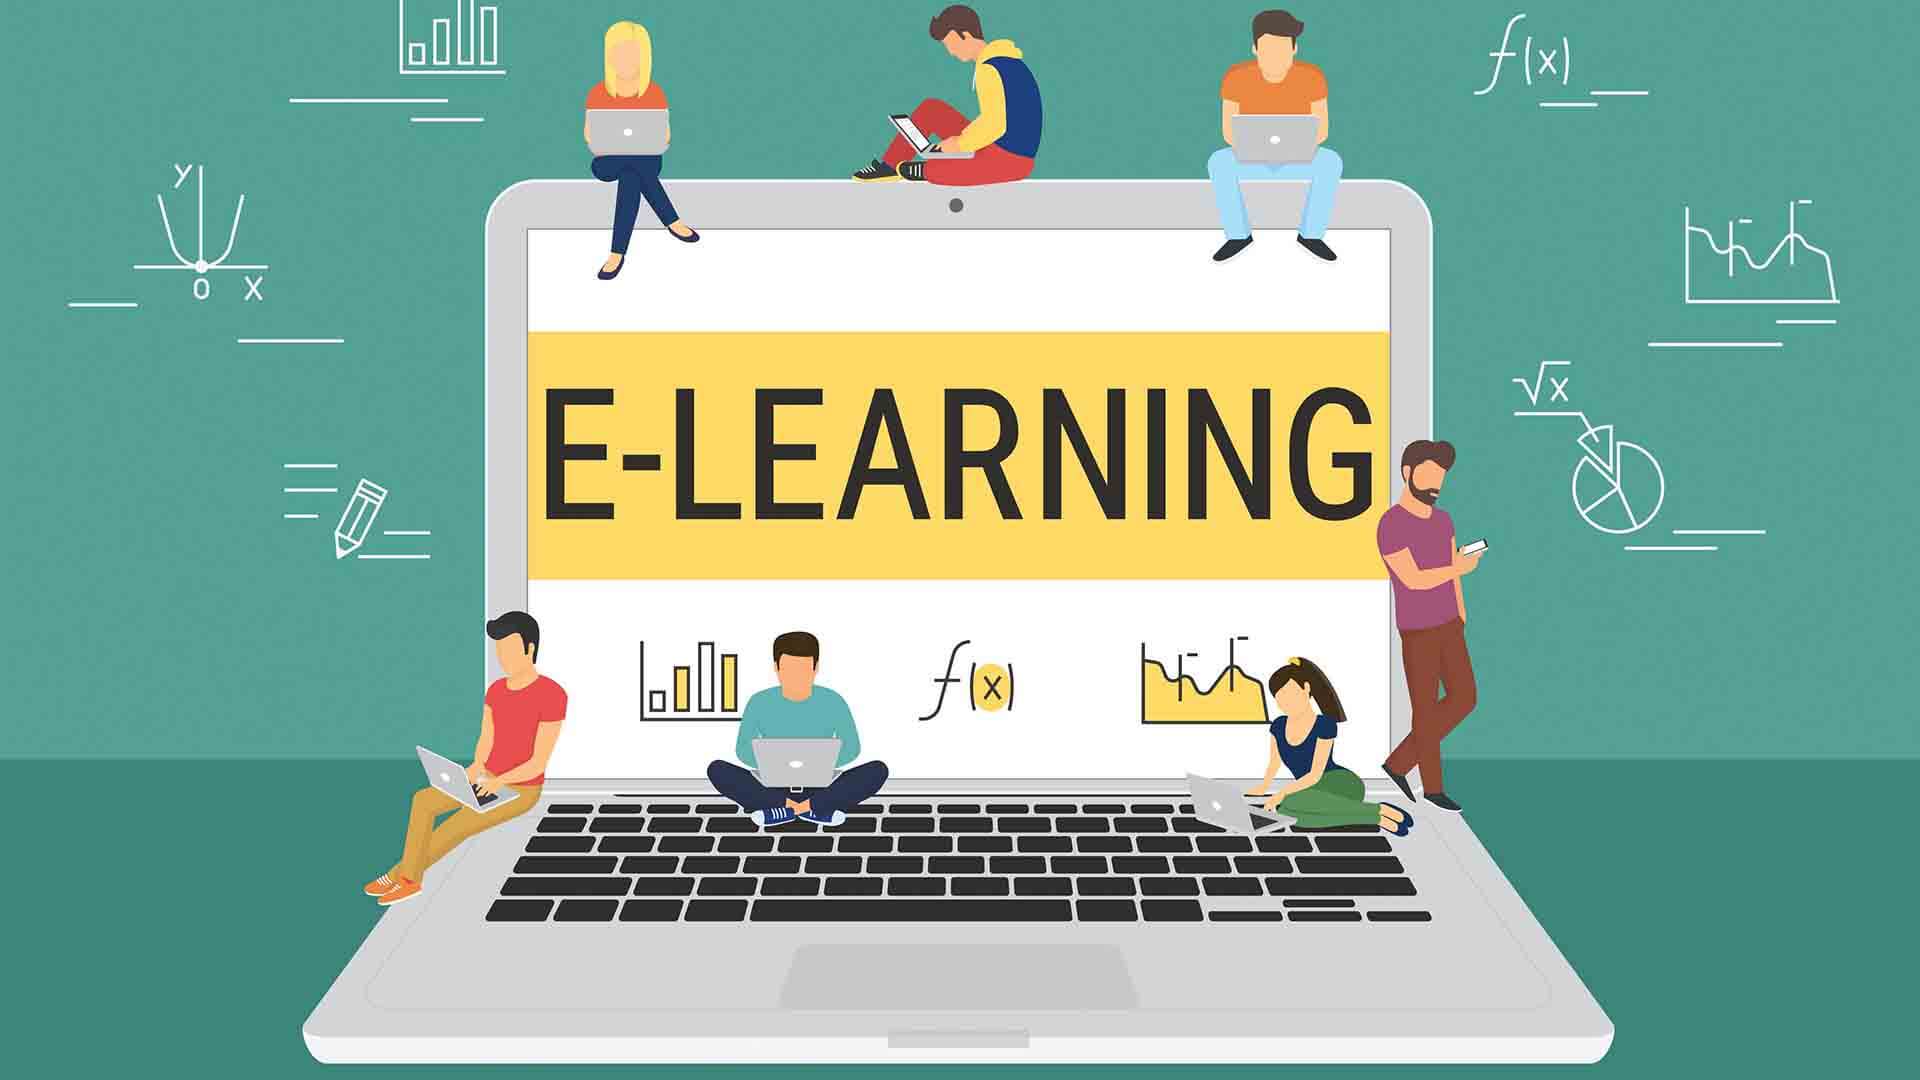 E-learning trends